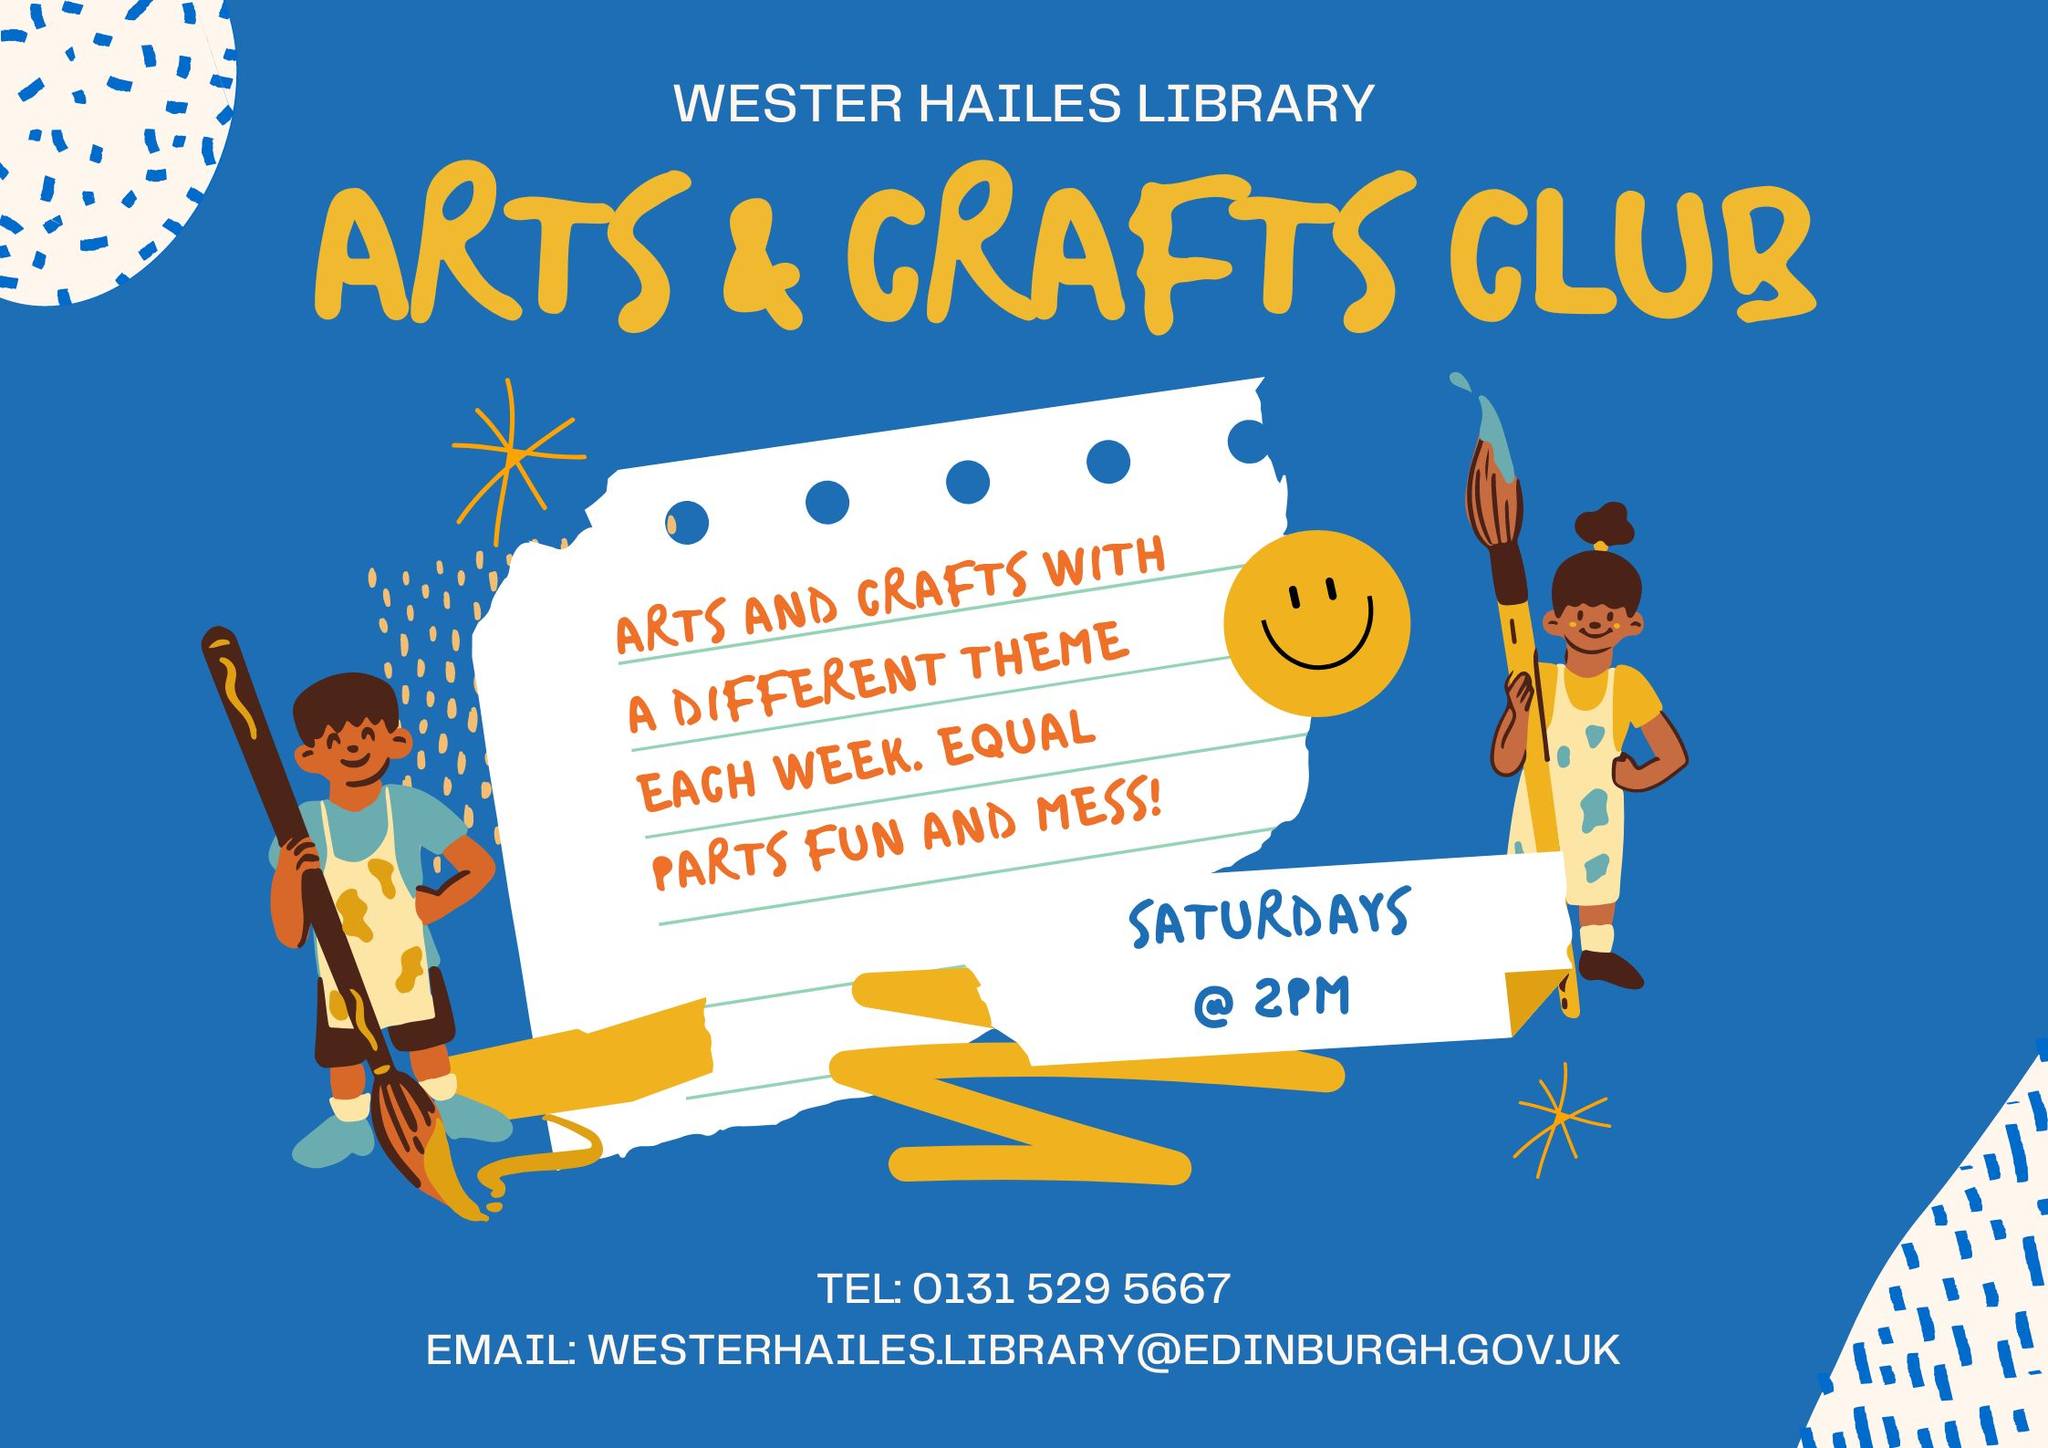 Wester Hailes library art-and-craft-club Poster Featured Image